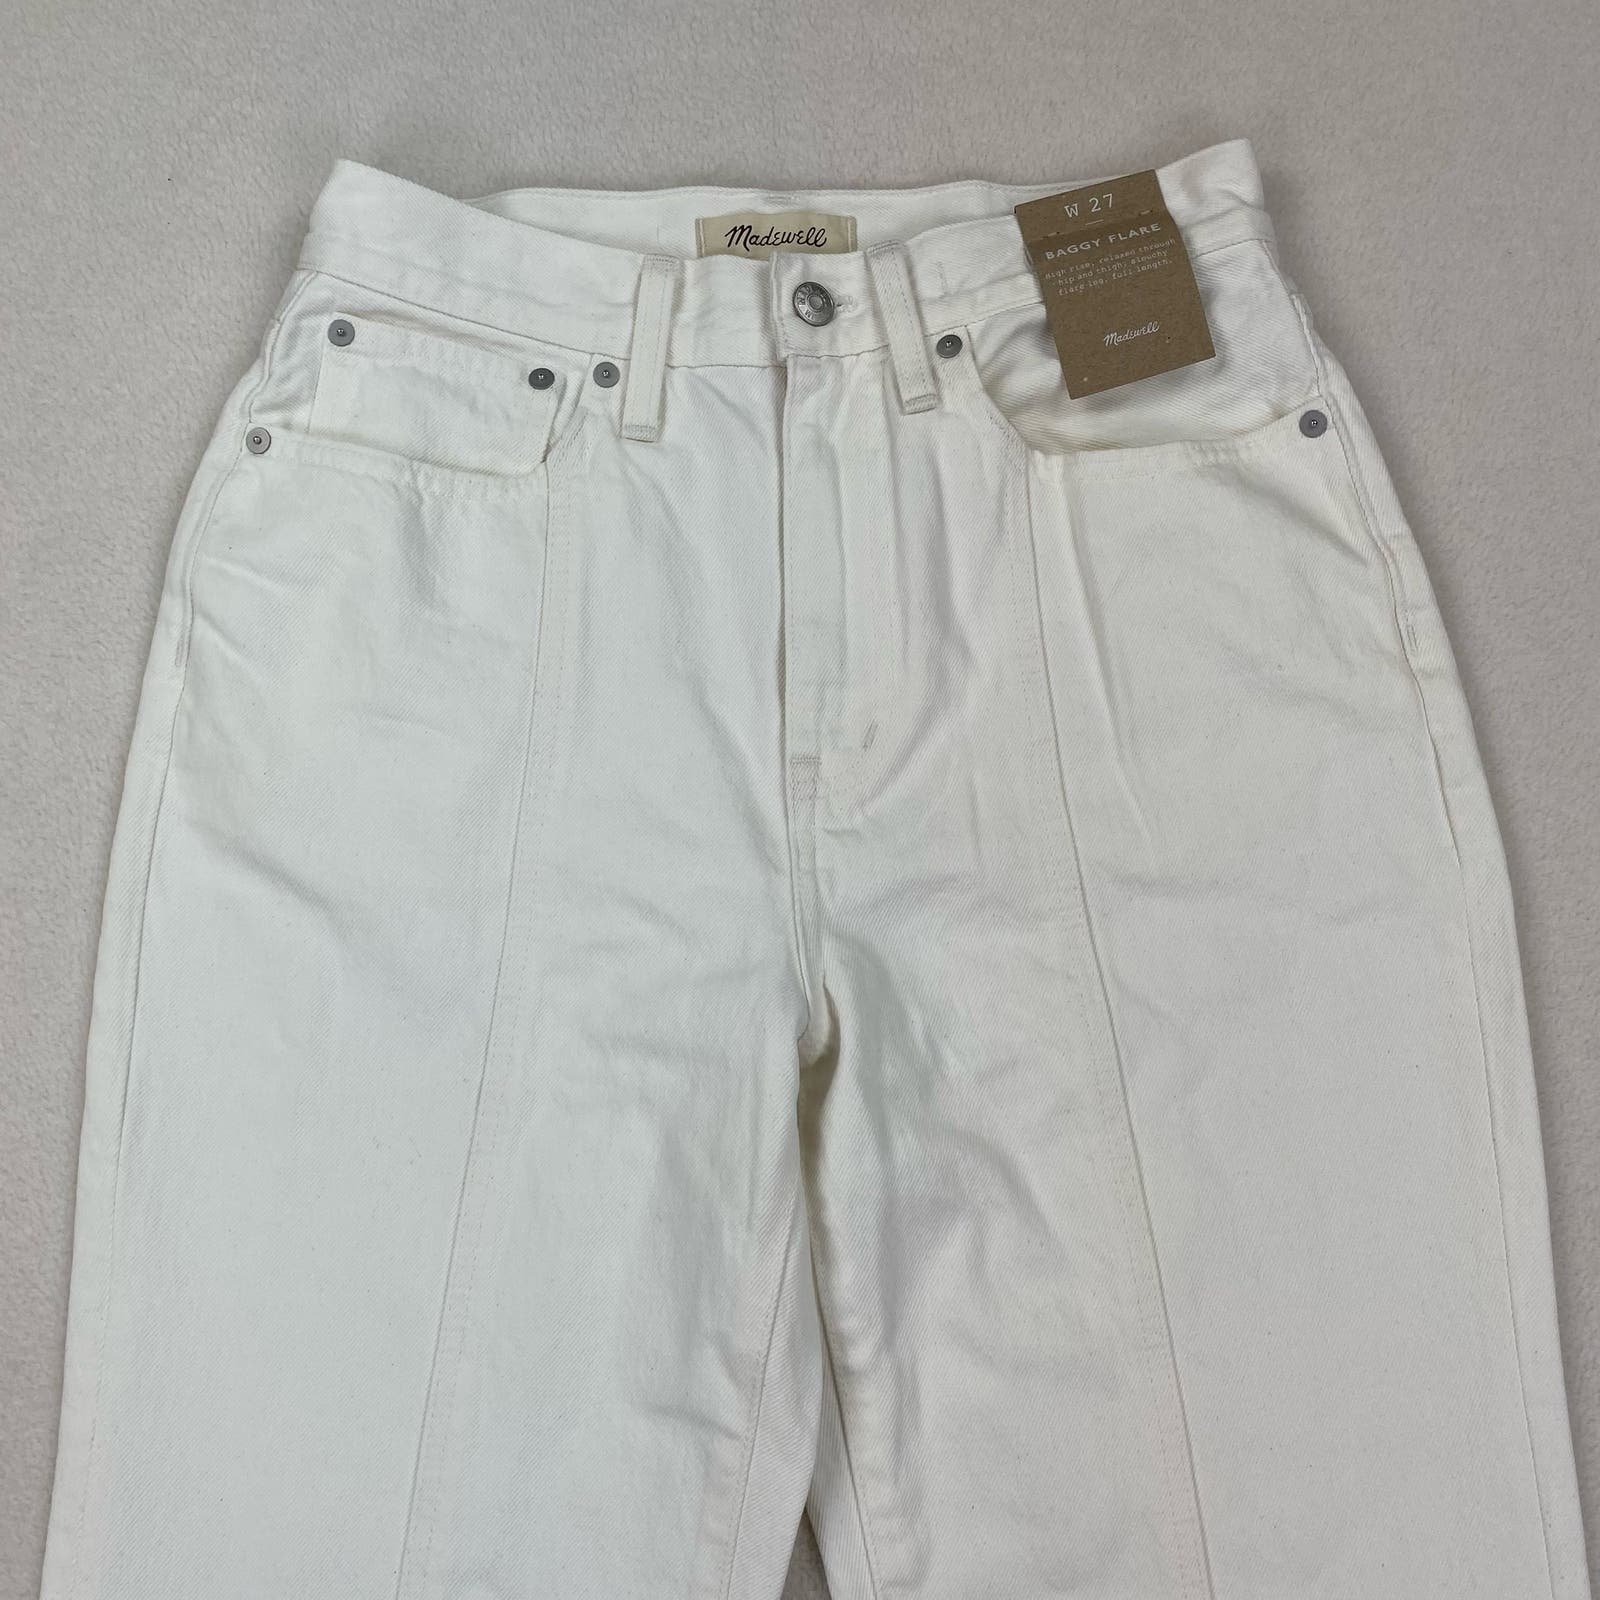 Amazing Madewell Jeans Size 27 White Baggy Flare Loose Fit High Rise Split Hem NWT HLEh32XPe Novel 